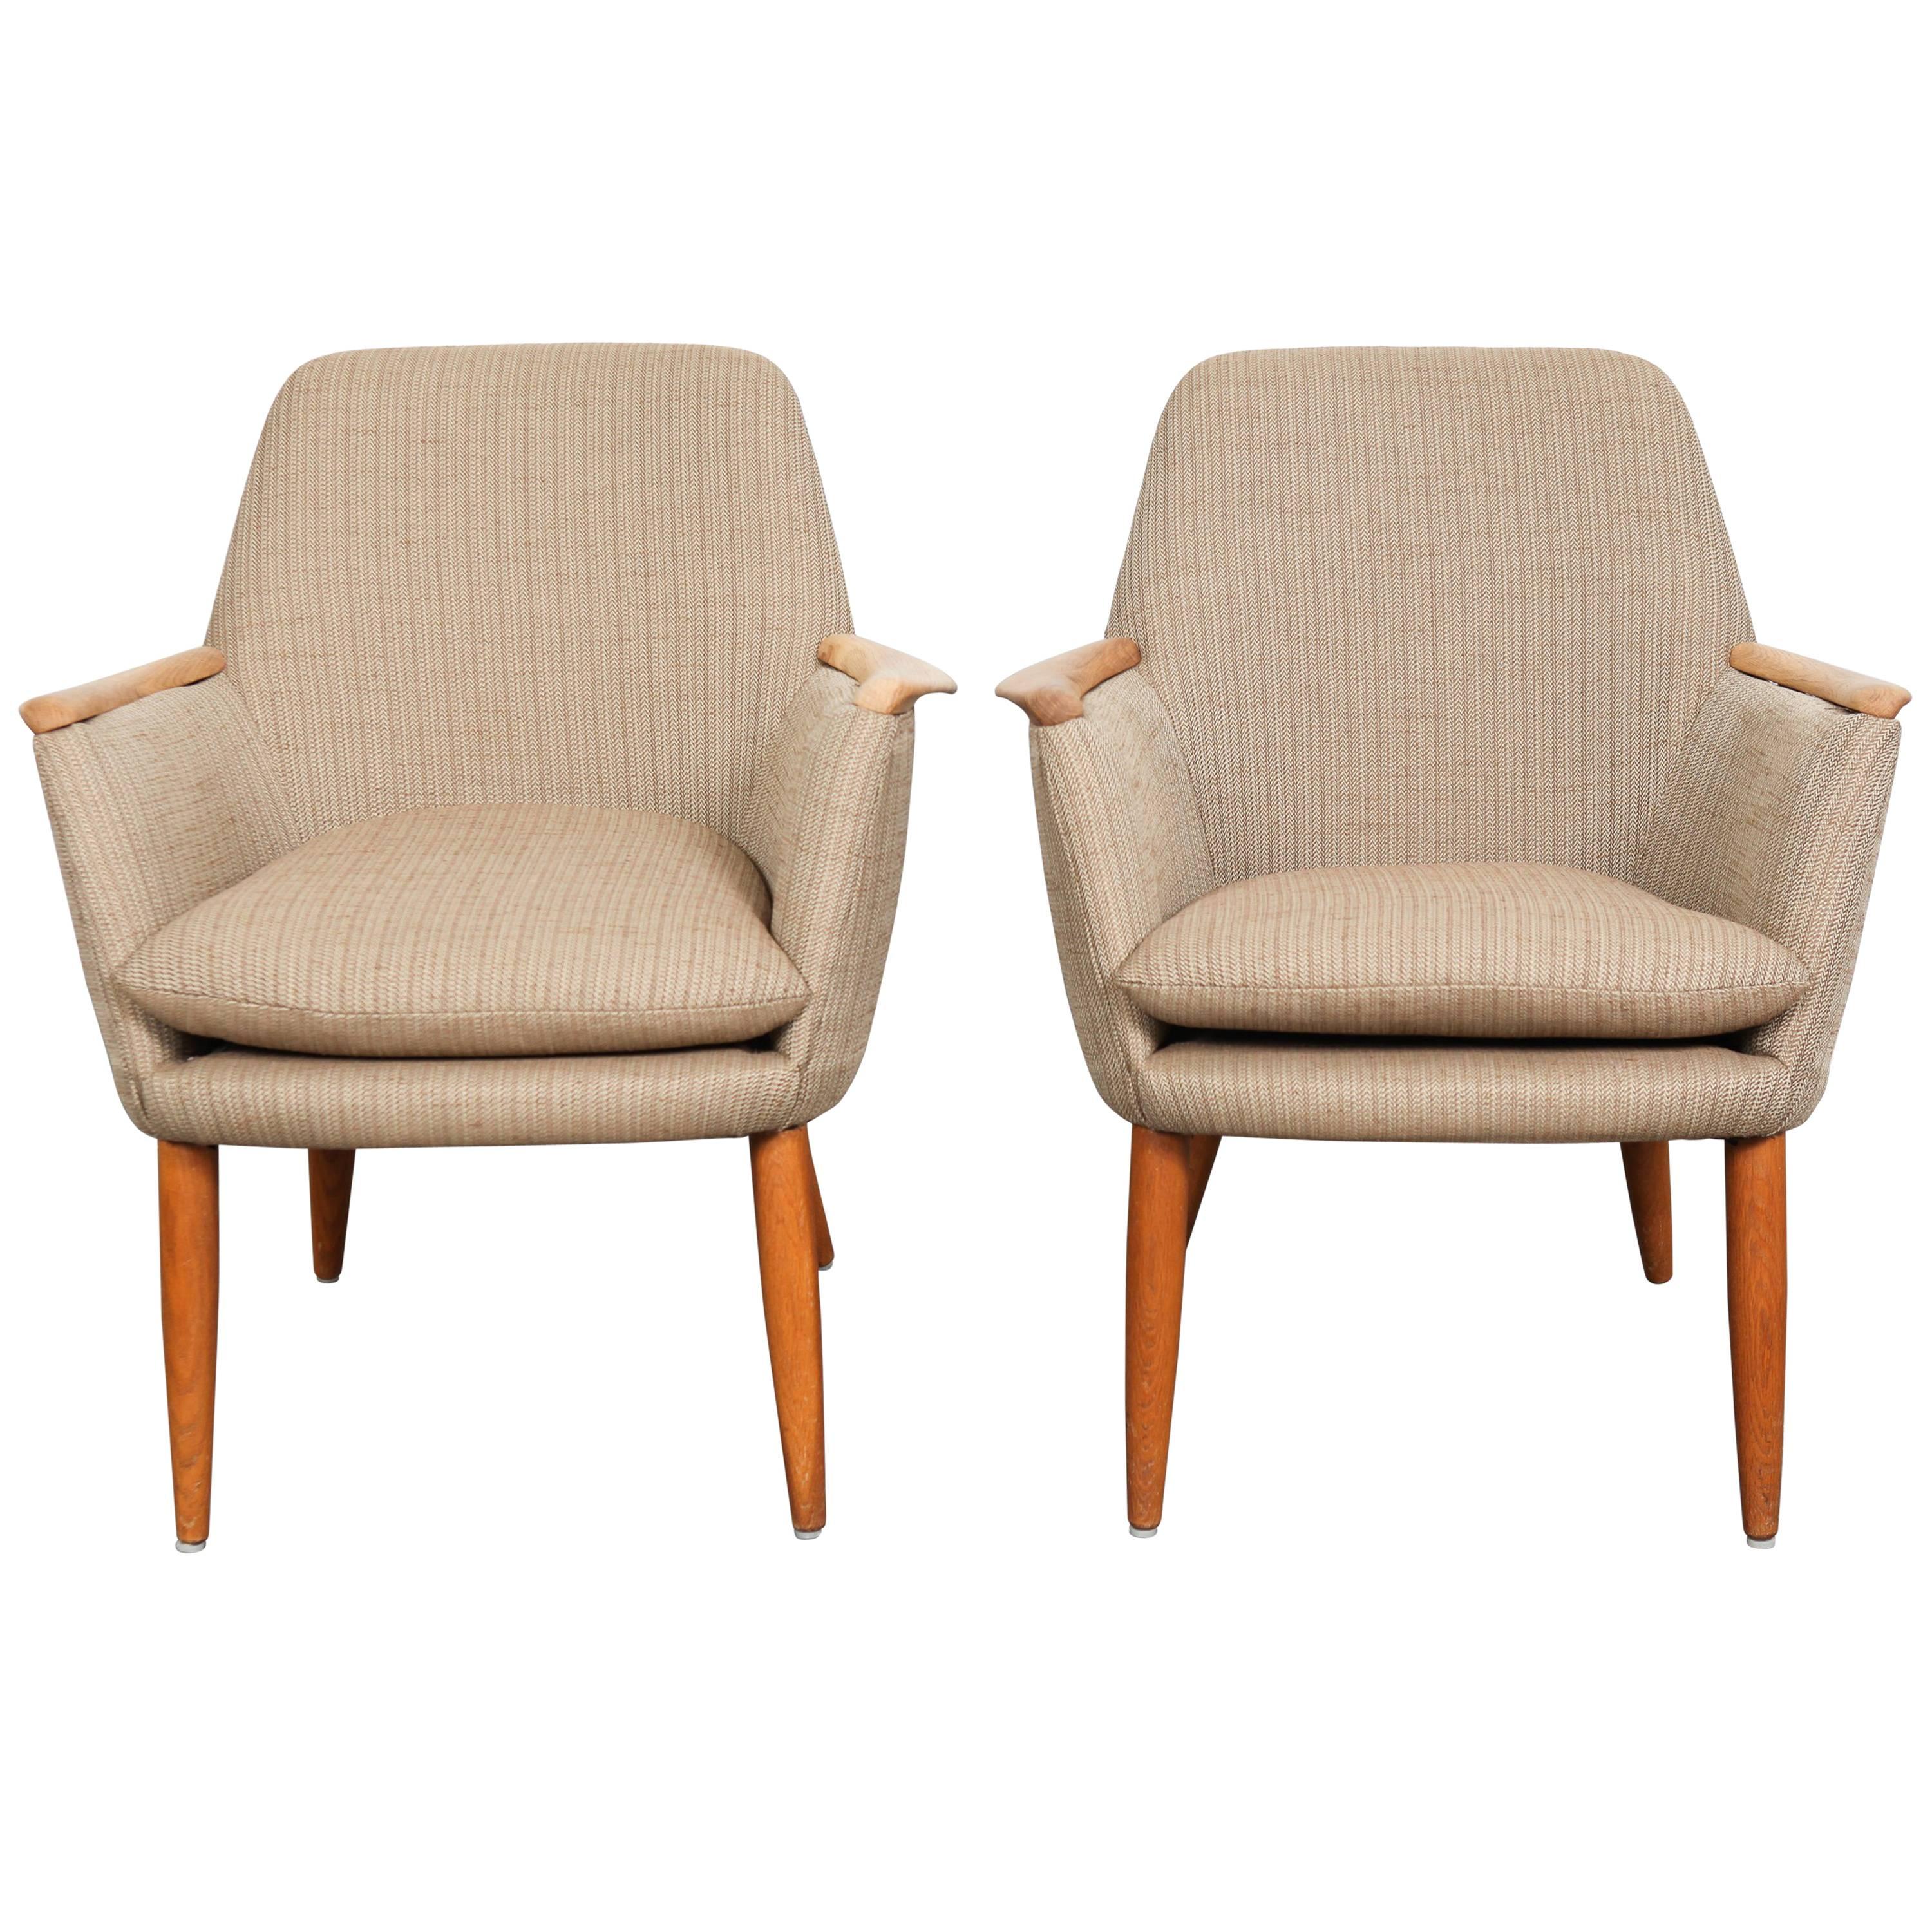 Pair of comfortable Mid-Century Modern Swedish lounge chairs with lipped oak arms and round teak tapered legs. These chairs have been recovered in new beige upholstery.